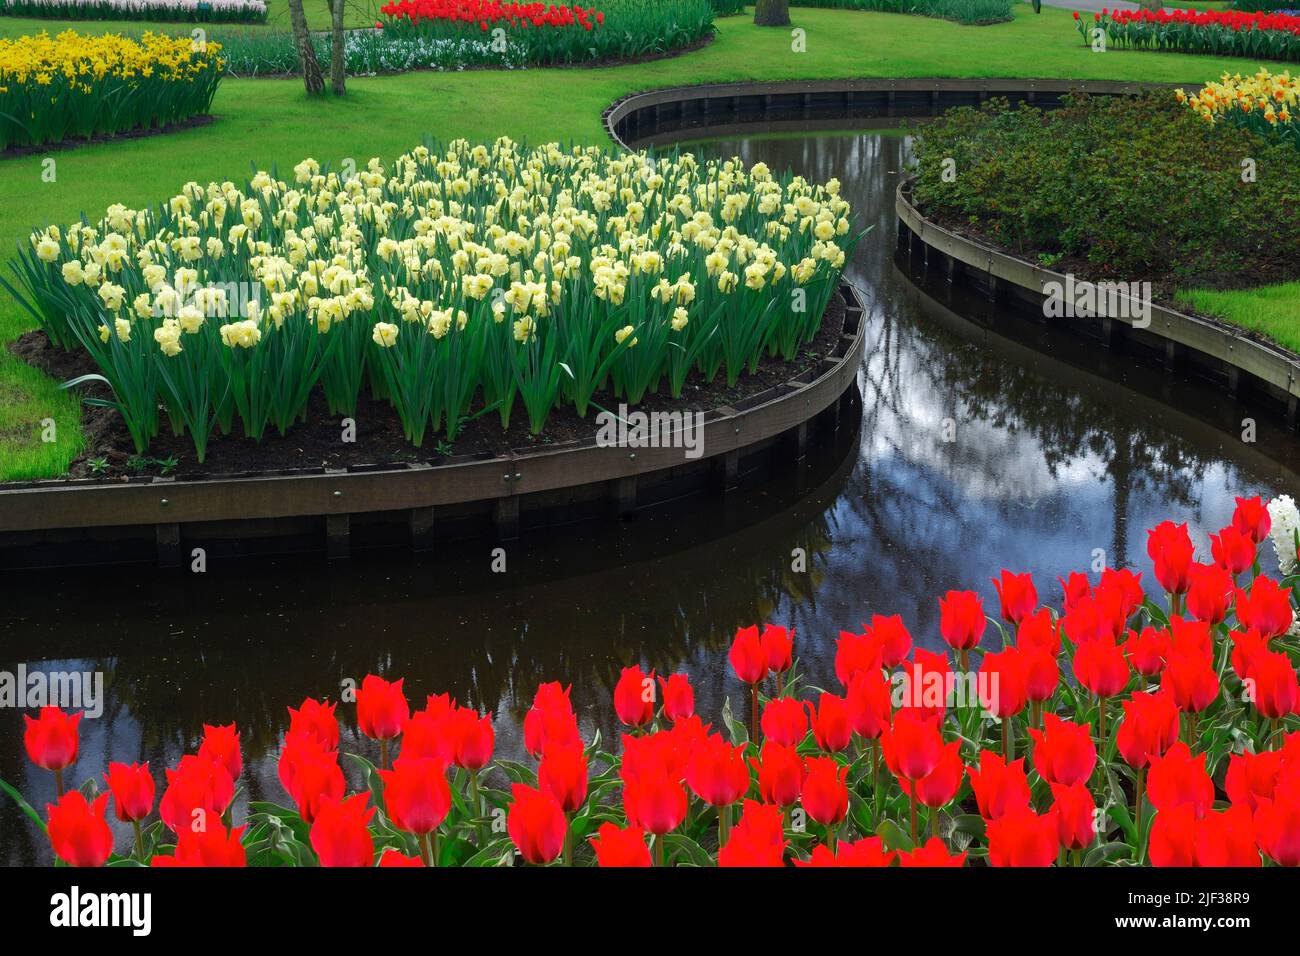 common garden tulip (Tulipa gesneriana), park with artificial brookbetwwen flowerbeds with tulips and daffodils Stock Photo